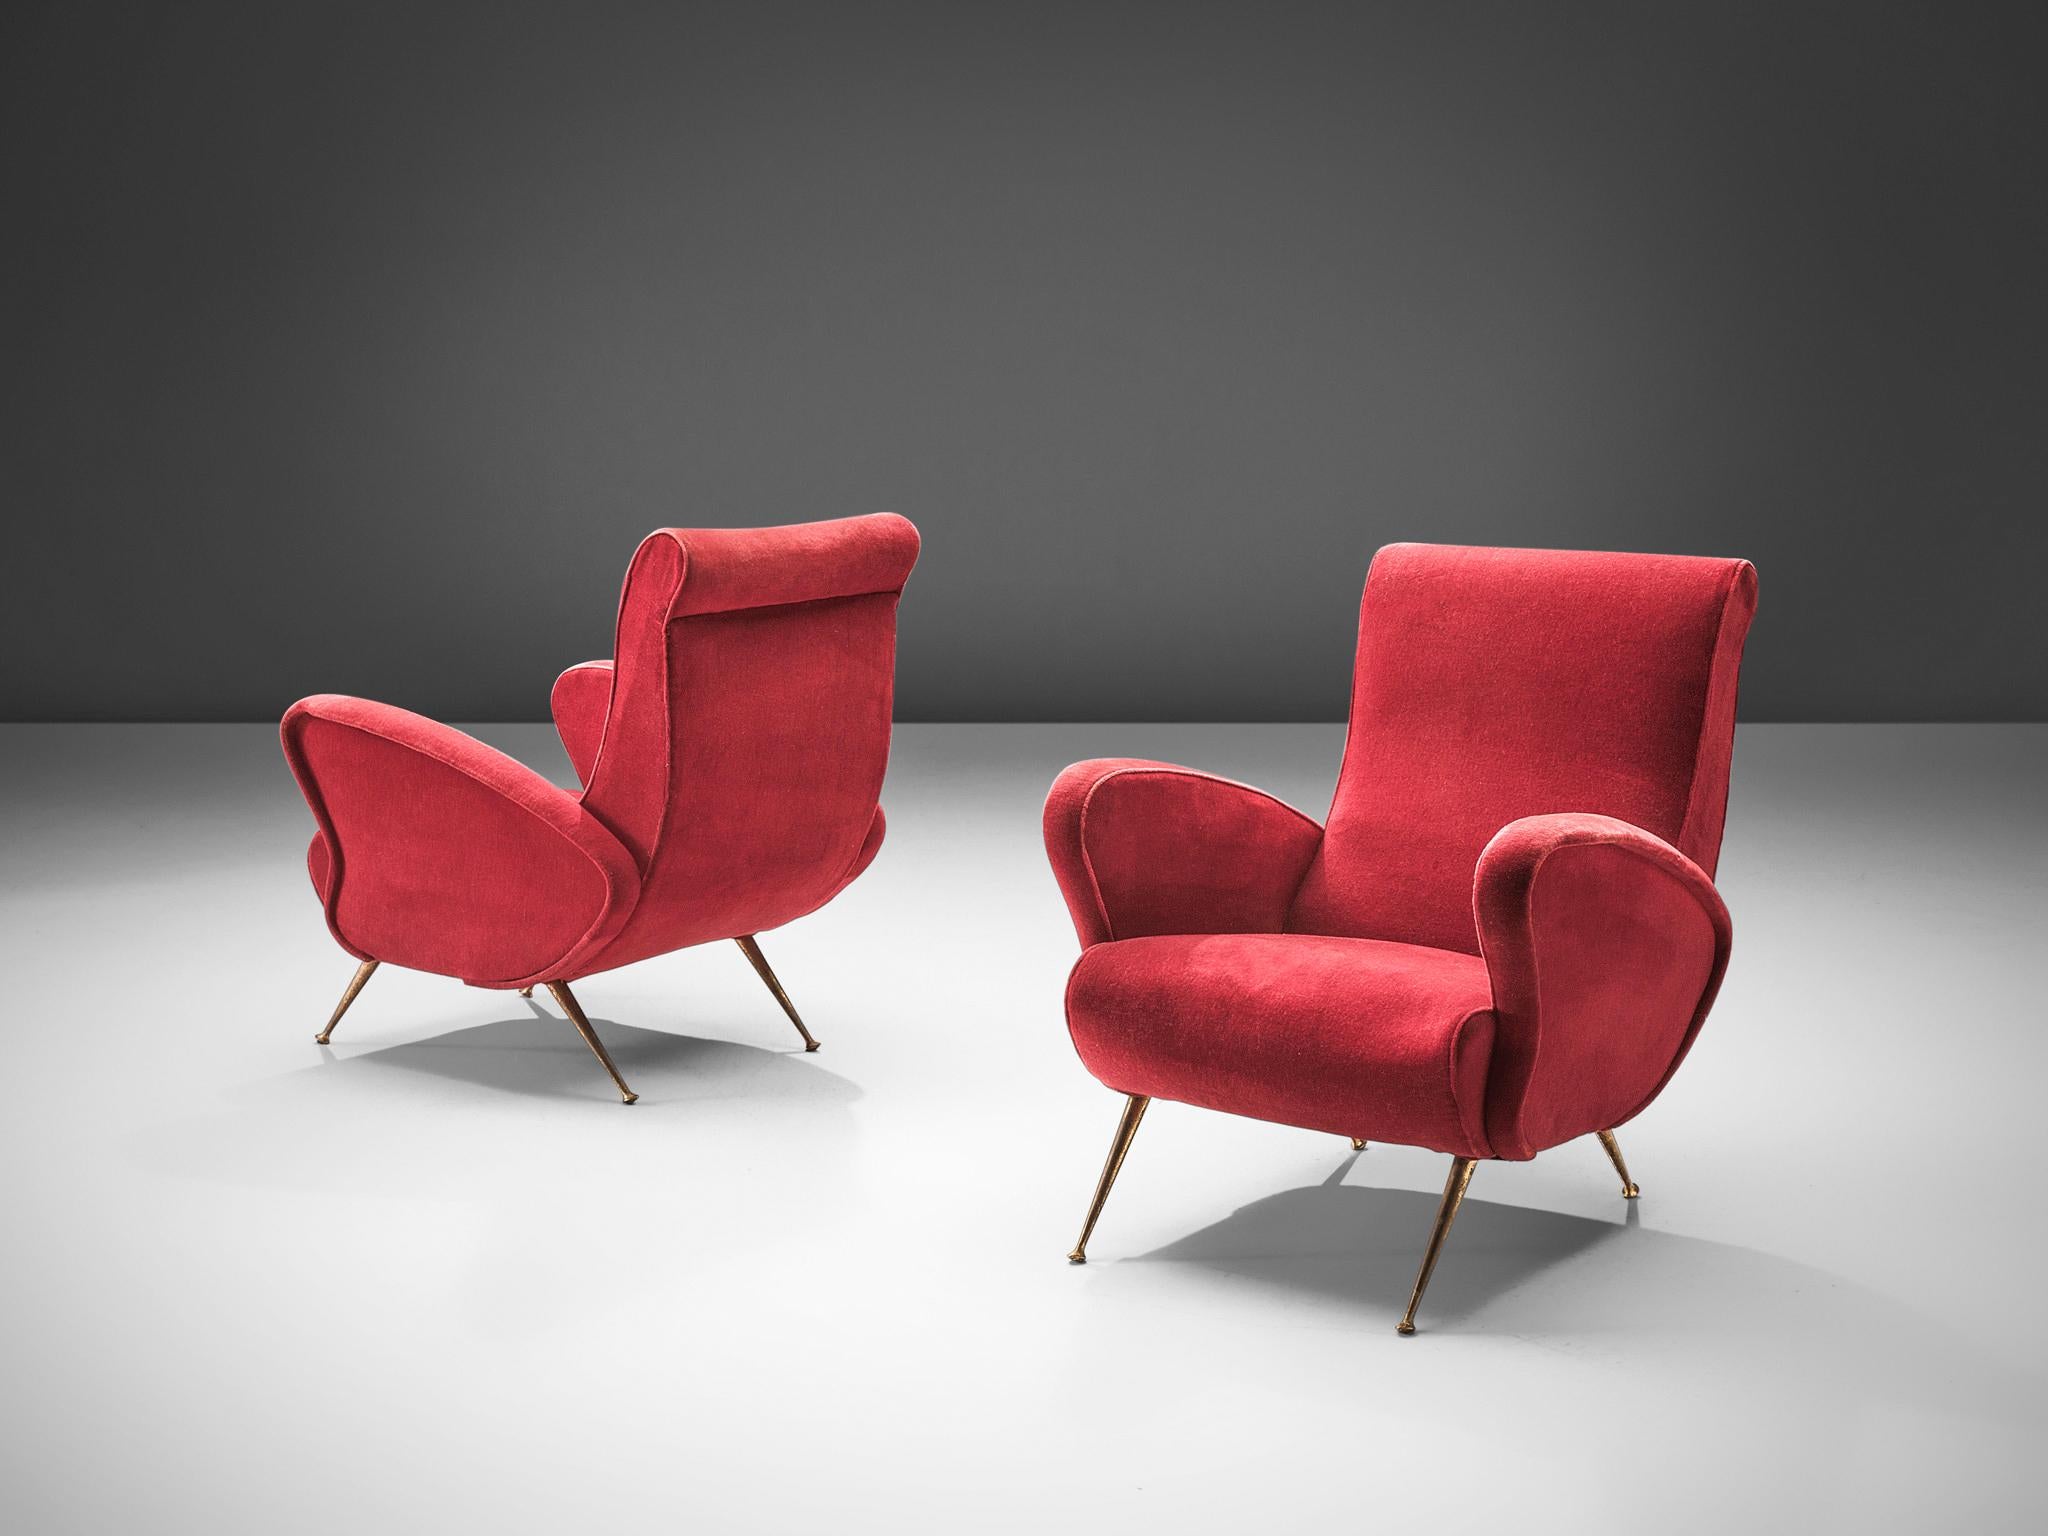 Pair of easy chairs, red velvet, brass, Italy, 1950s.

This pair of lounge chairs is an iconic example of Italian design from the fifties. Organic and sculptural the armchairs are anything but minimalistic. Equipped with the original stiletto brass